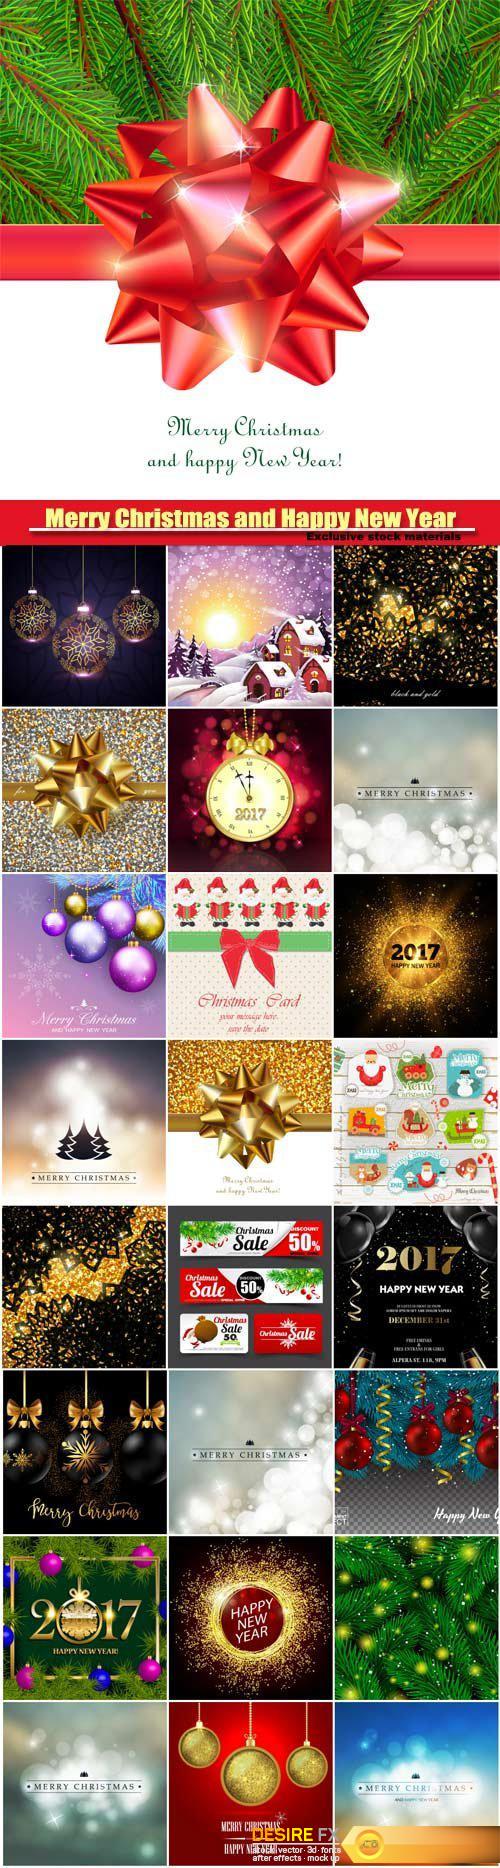 Merry Christmas and Happy New Year vector, festive background for greeting card, shiny decorative sign